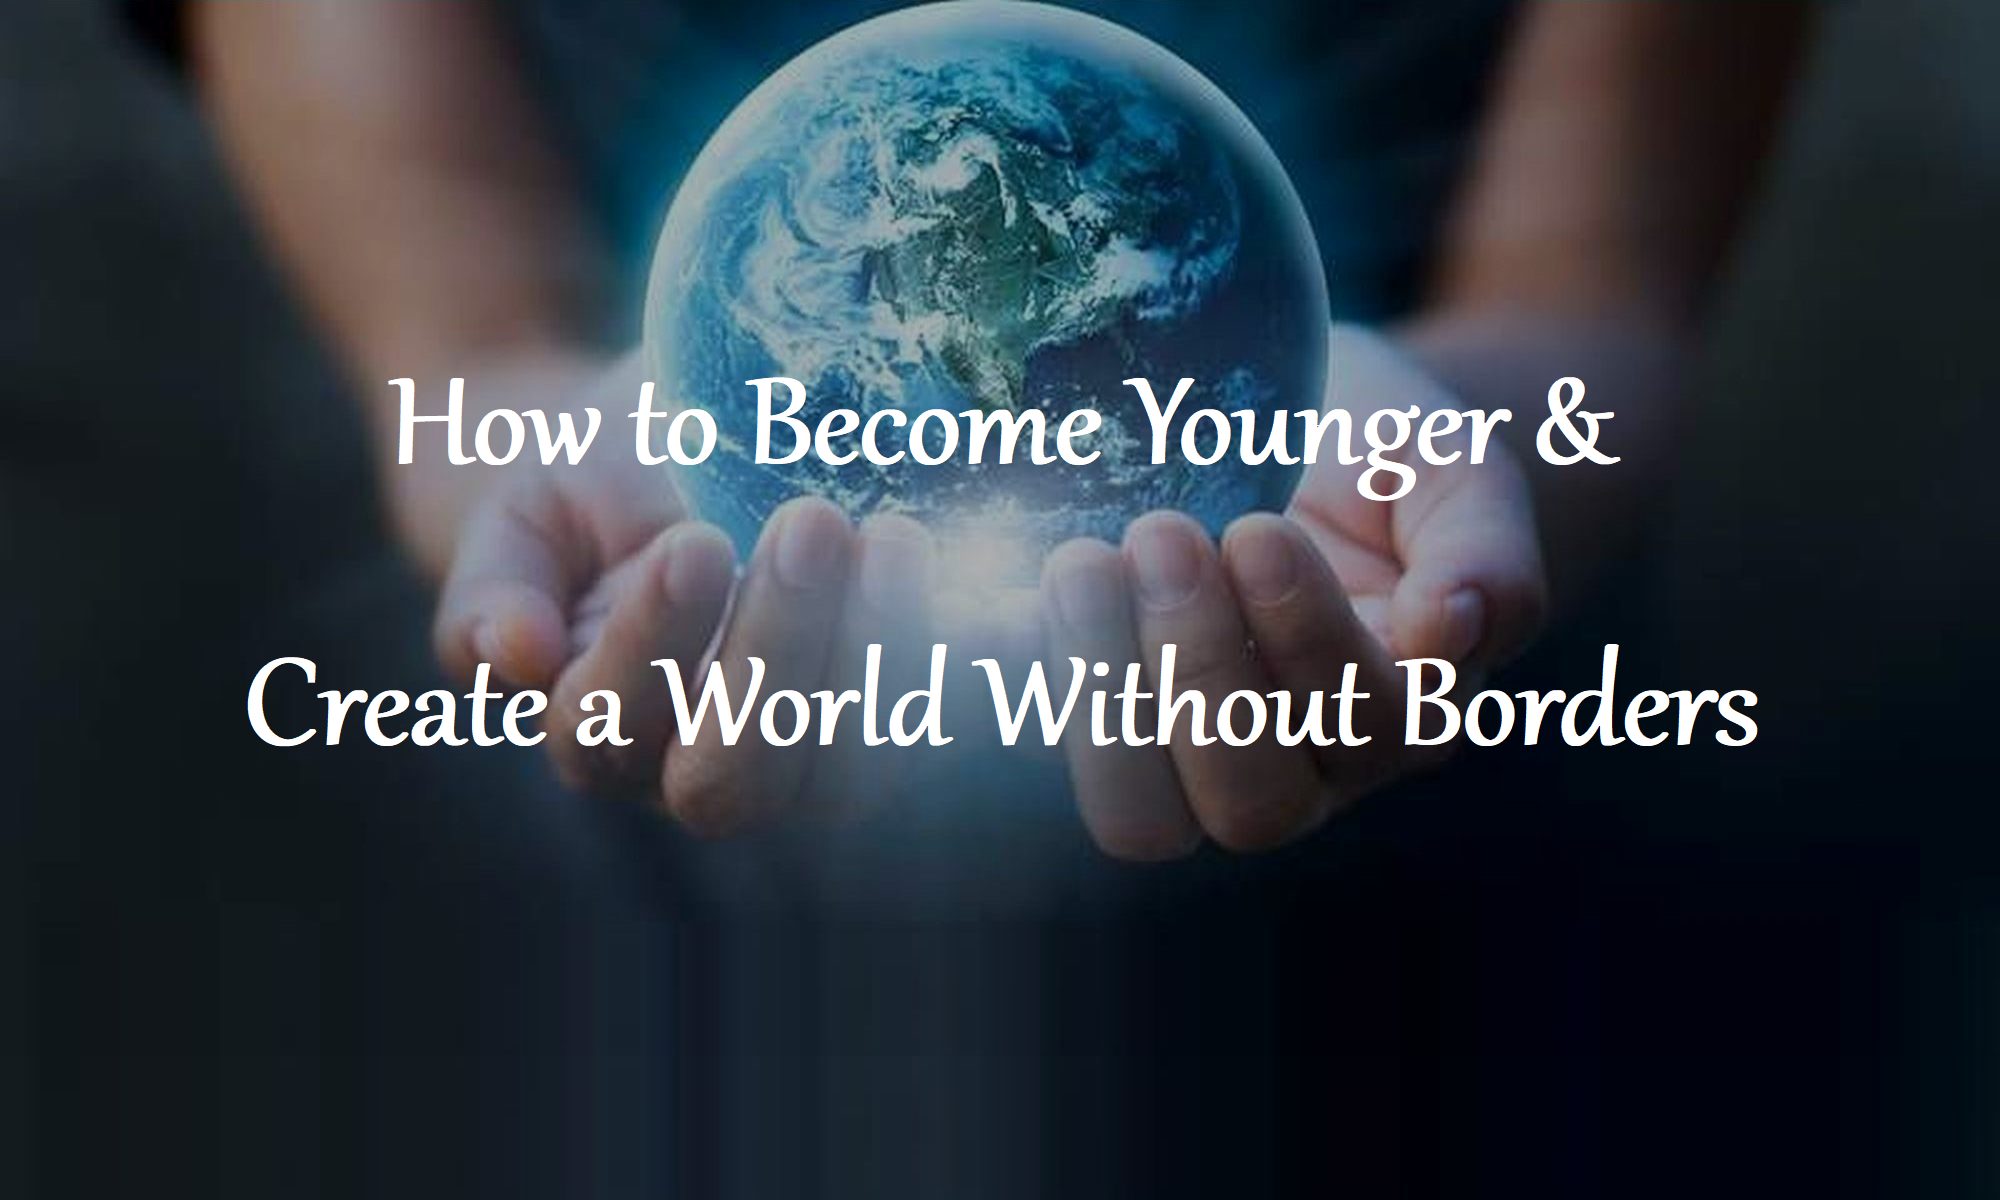 How You Can Become Younger Create a World Without Borders